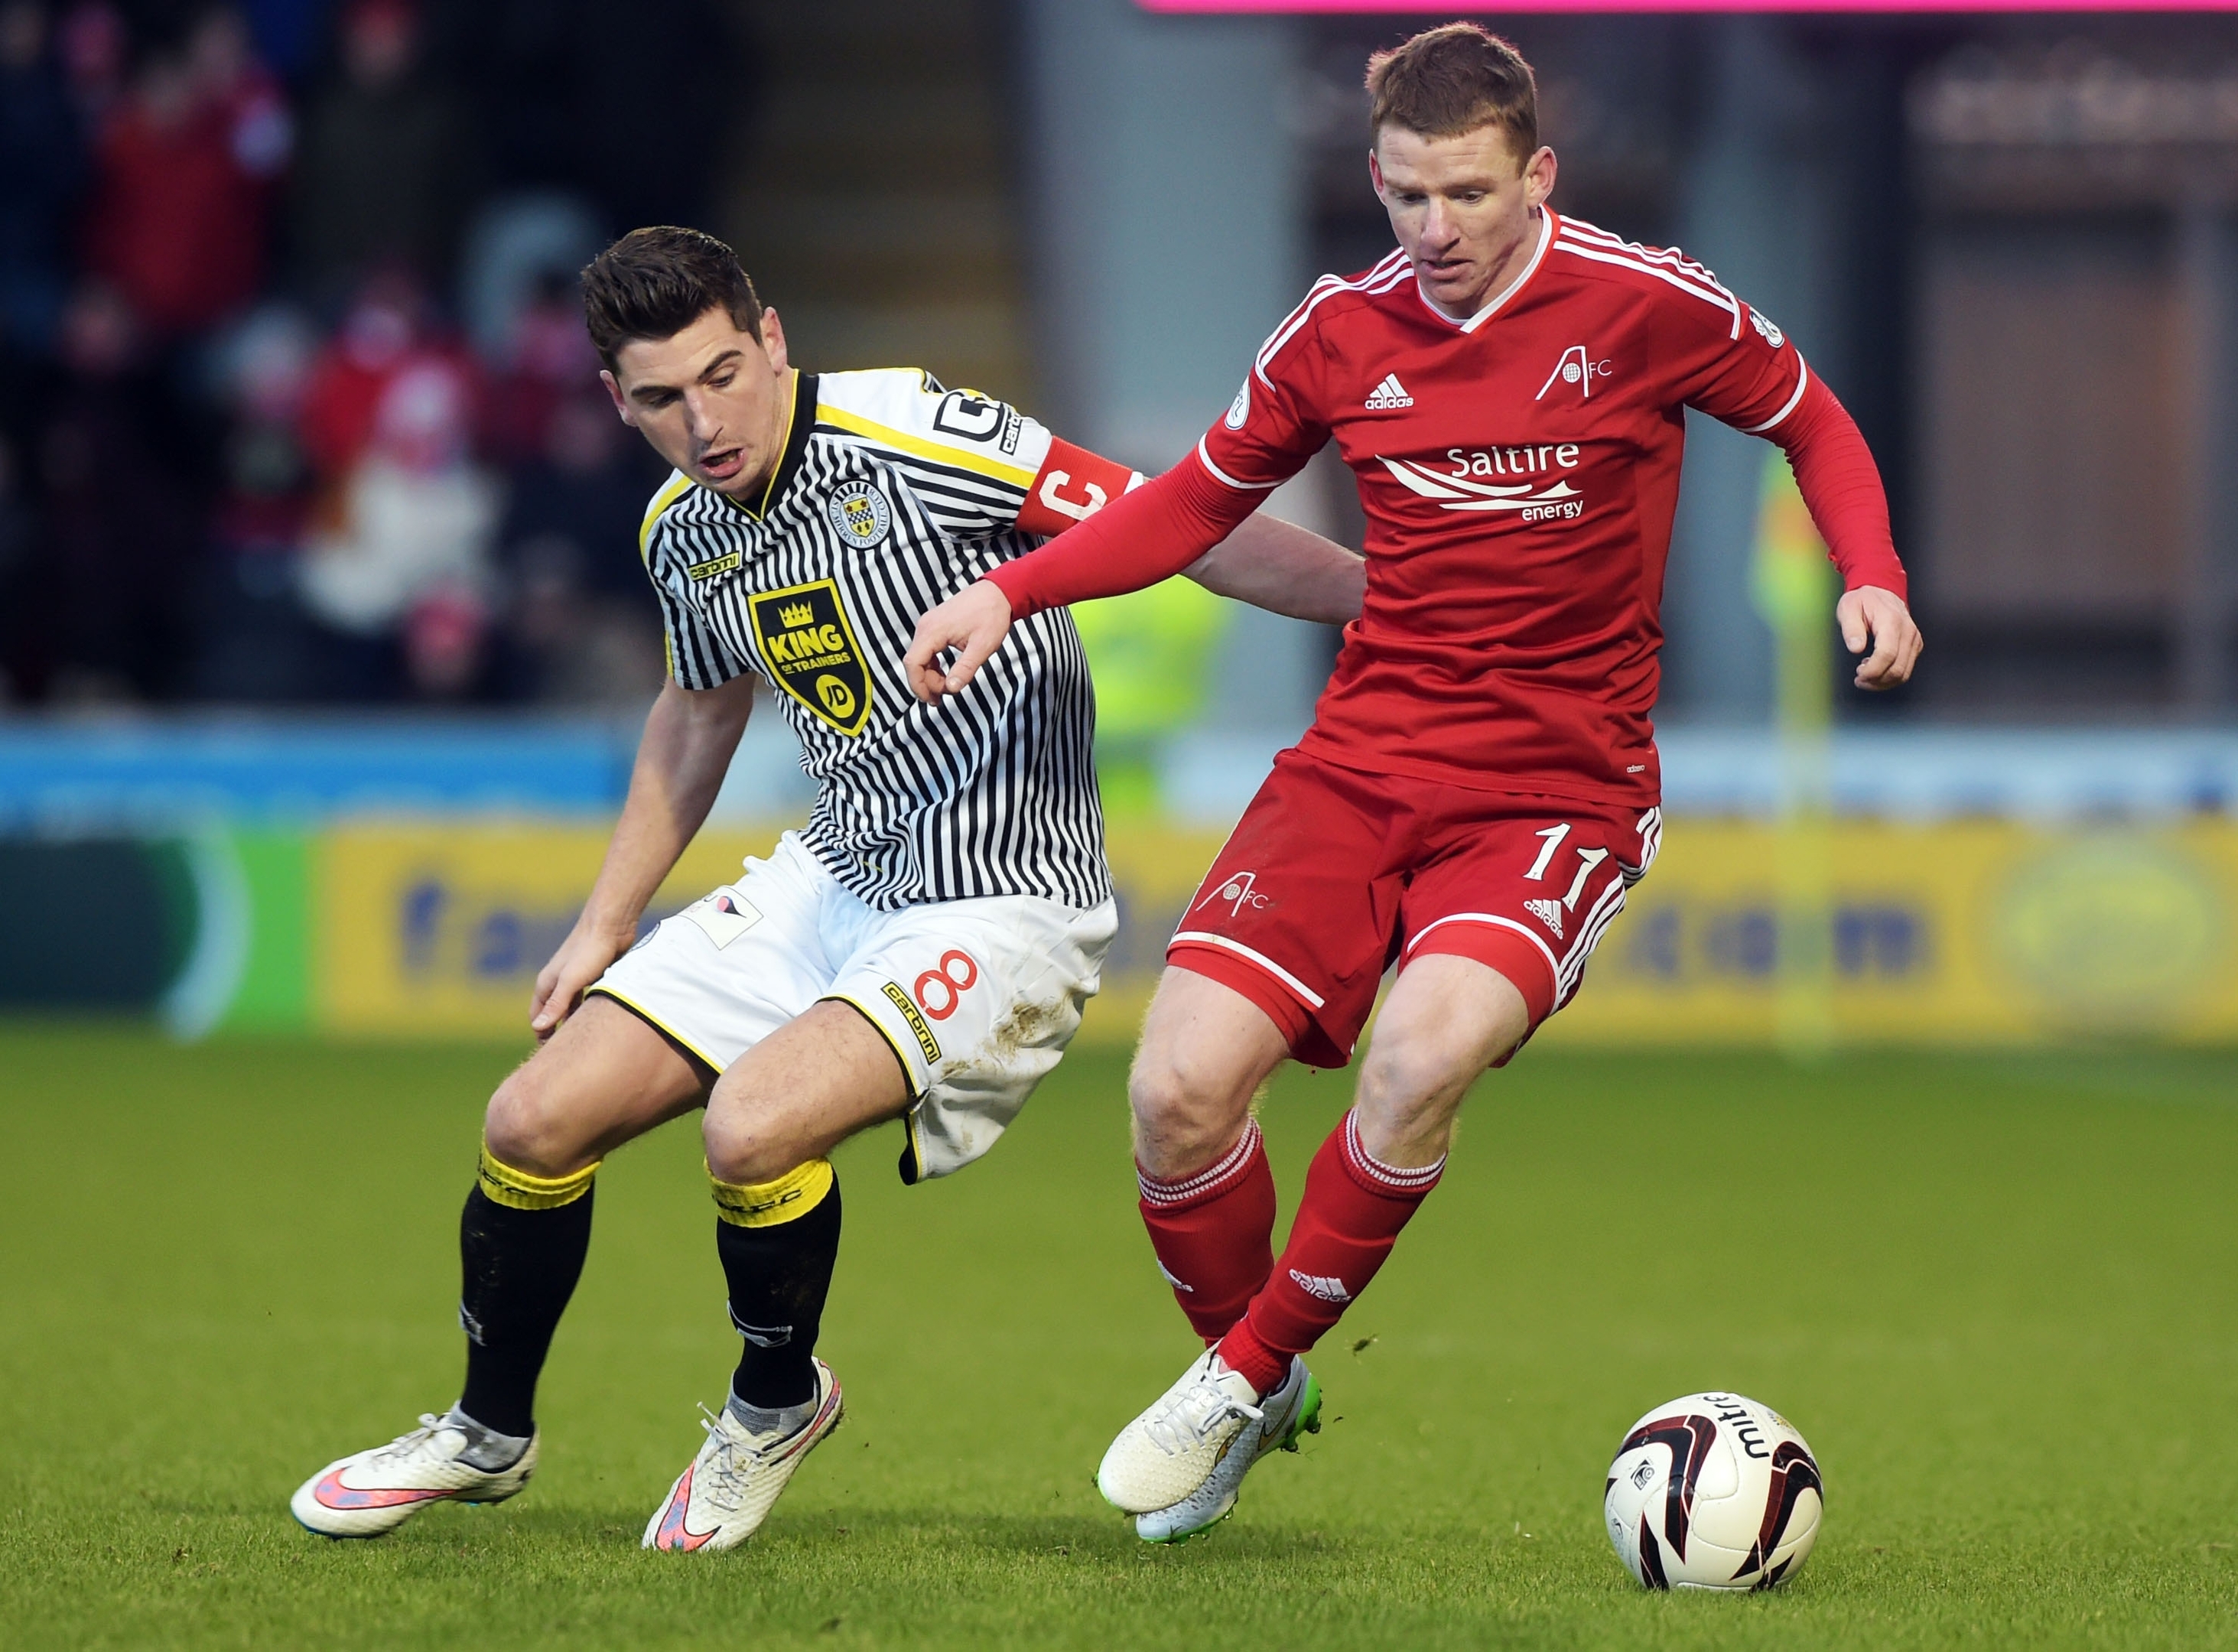 St Mirren's most dangerous player, Kenny McLean, started up front but the Dons kept him quiet